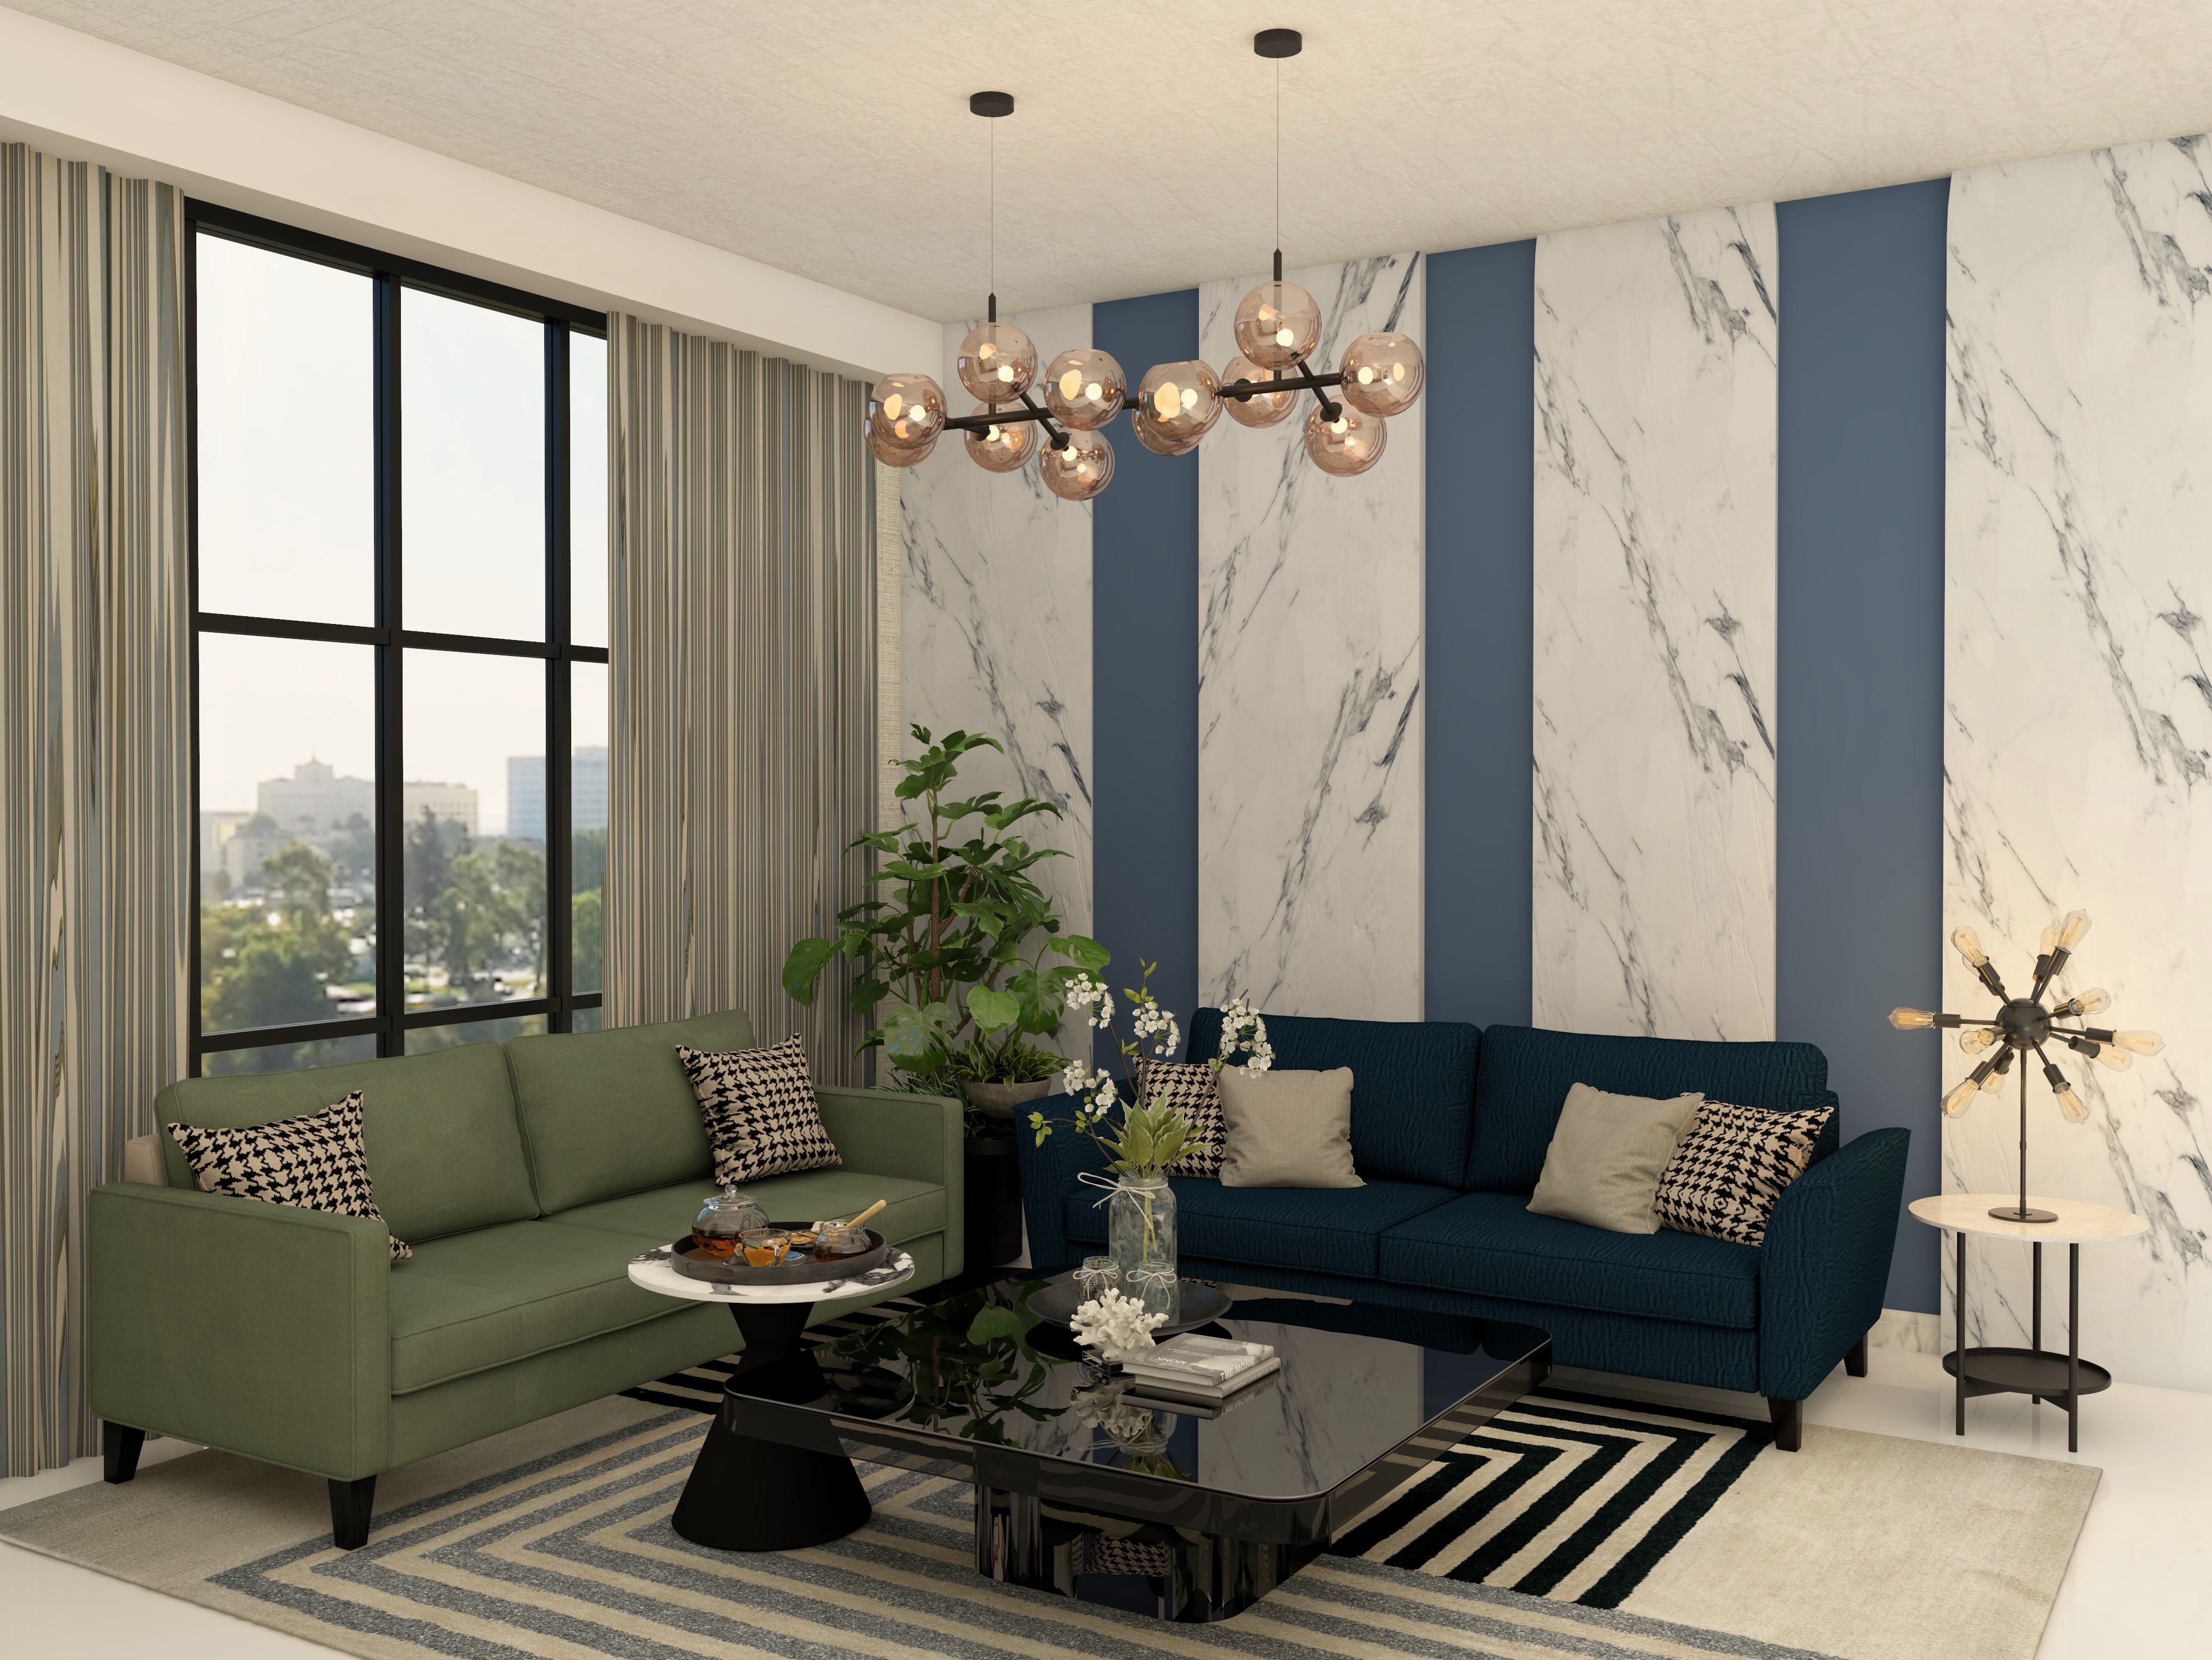 Modern living room with white and blue wall paneling - Beautiful Homes